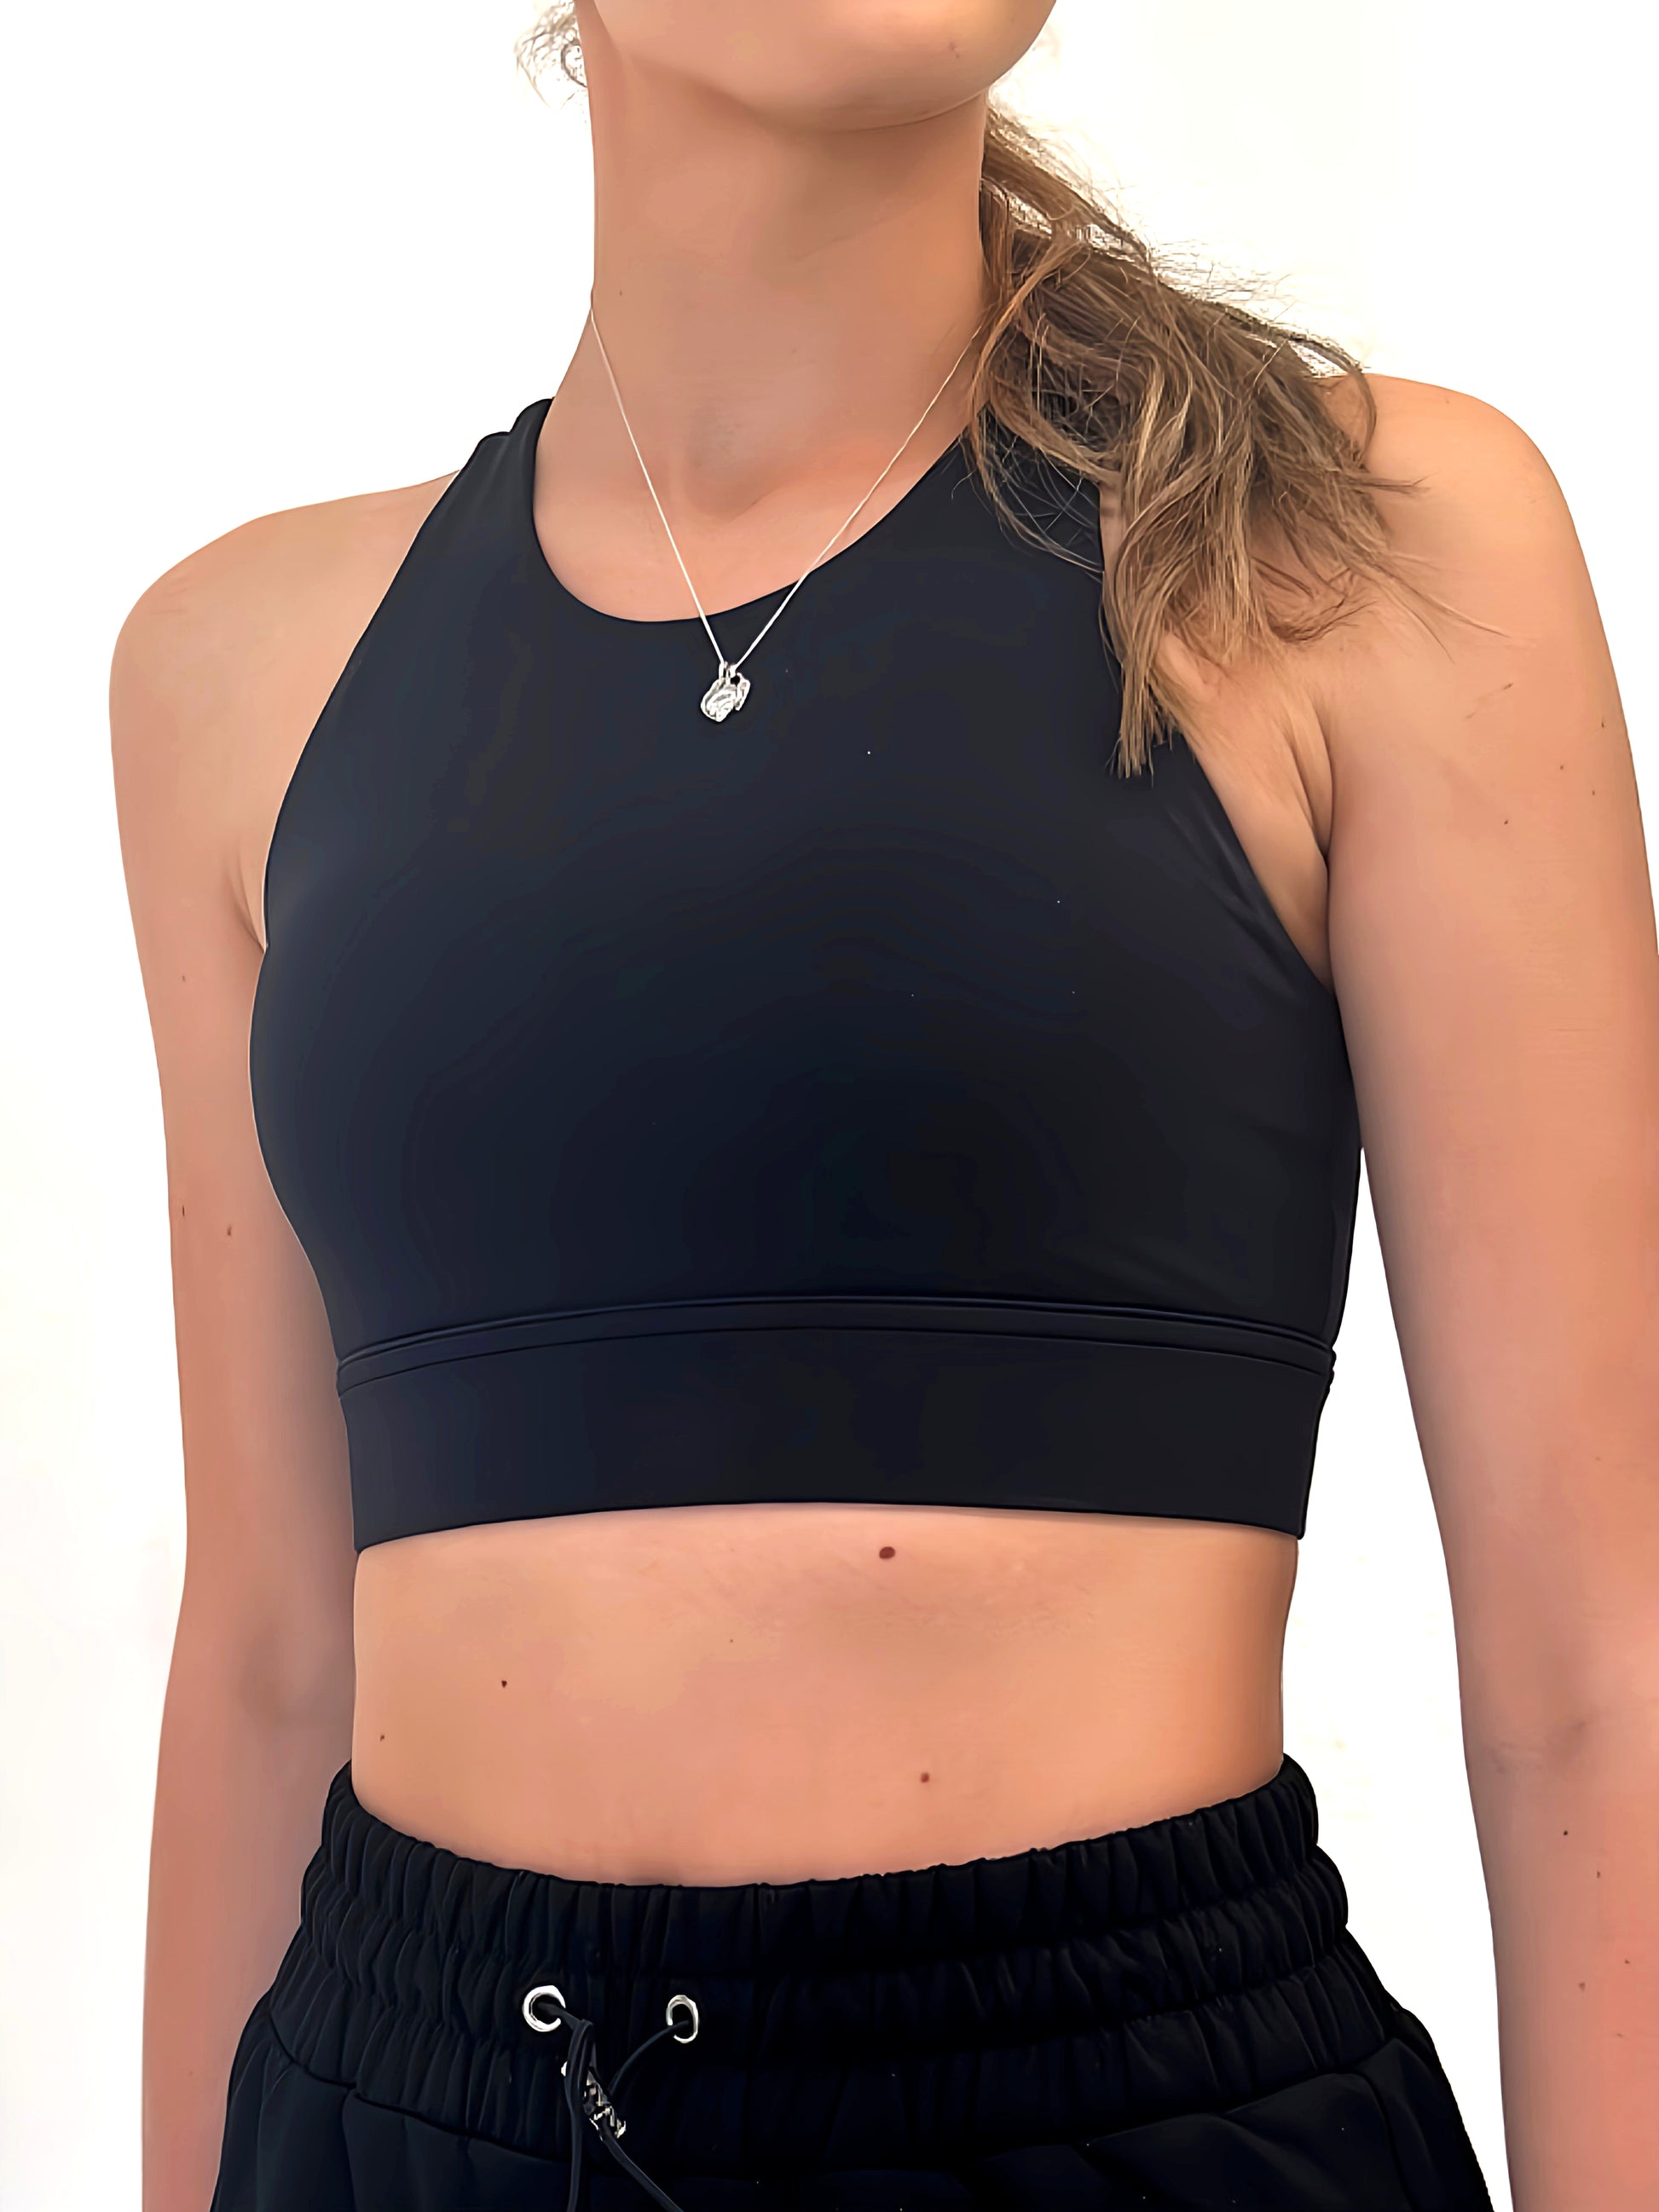 High Impact Sports Bras, Top-Rated Bras, Sports Bras for Best